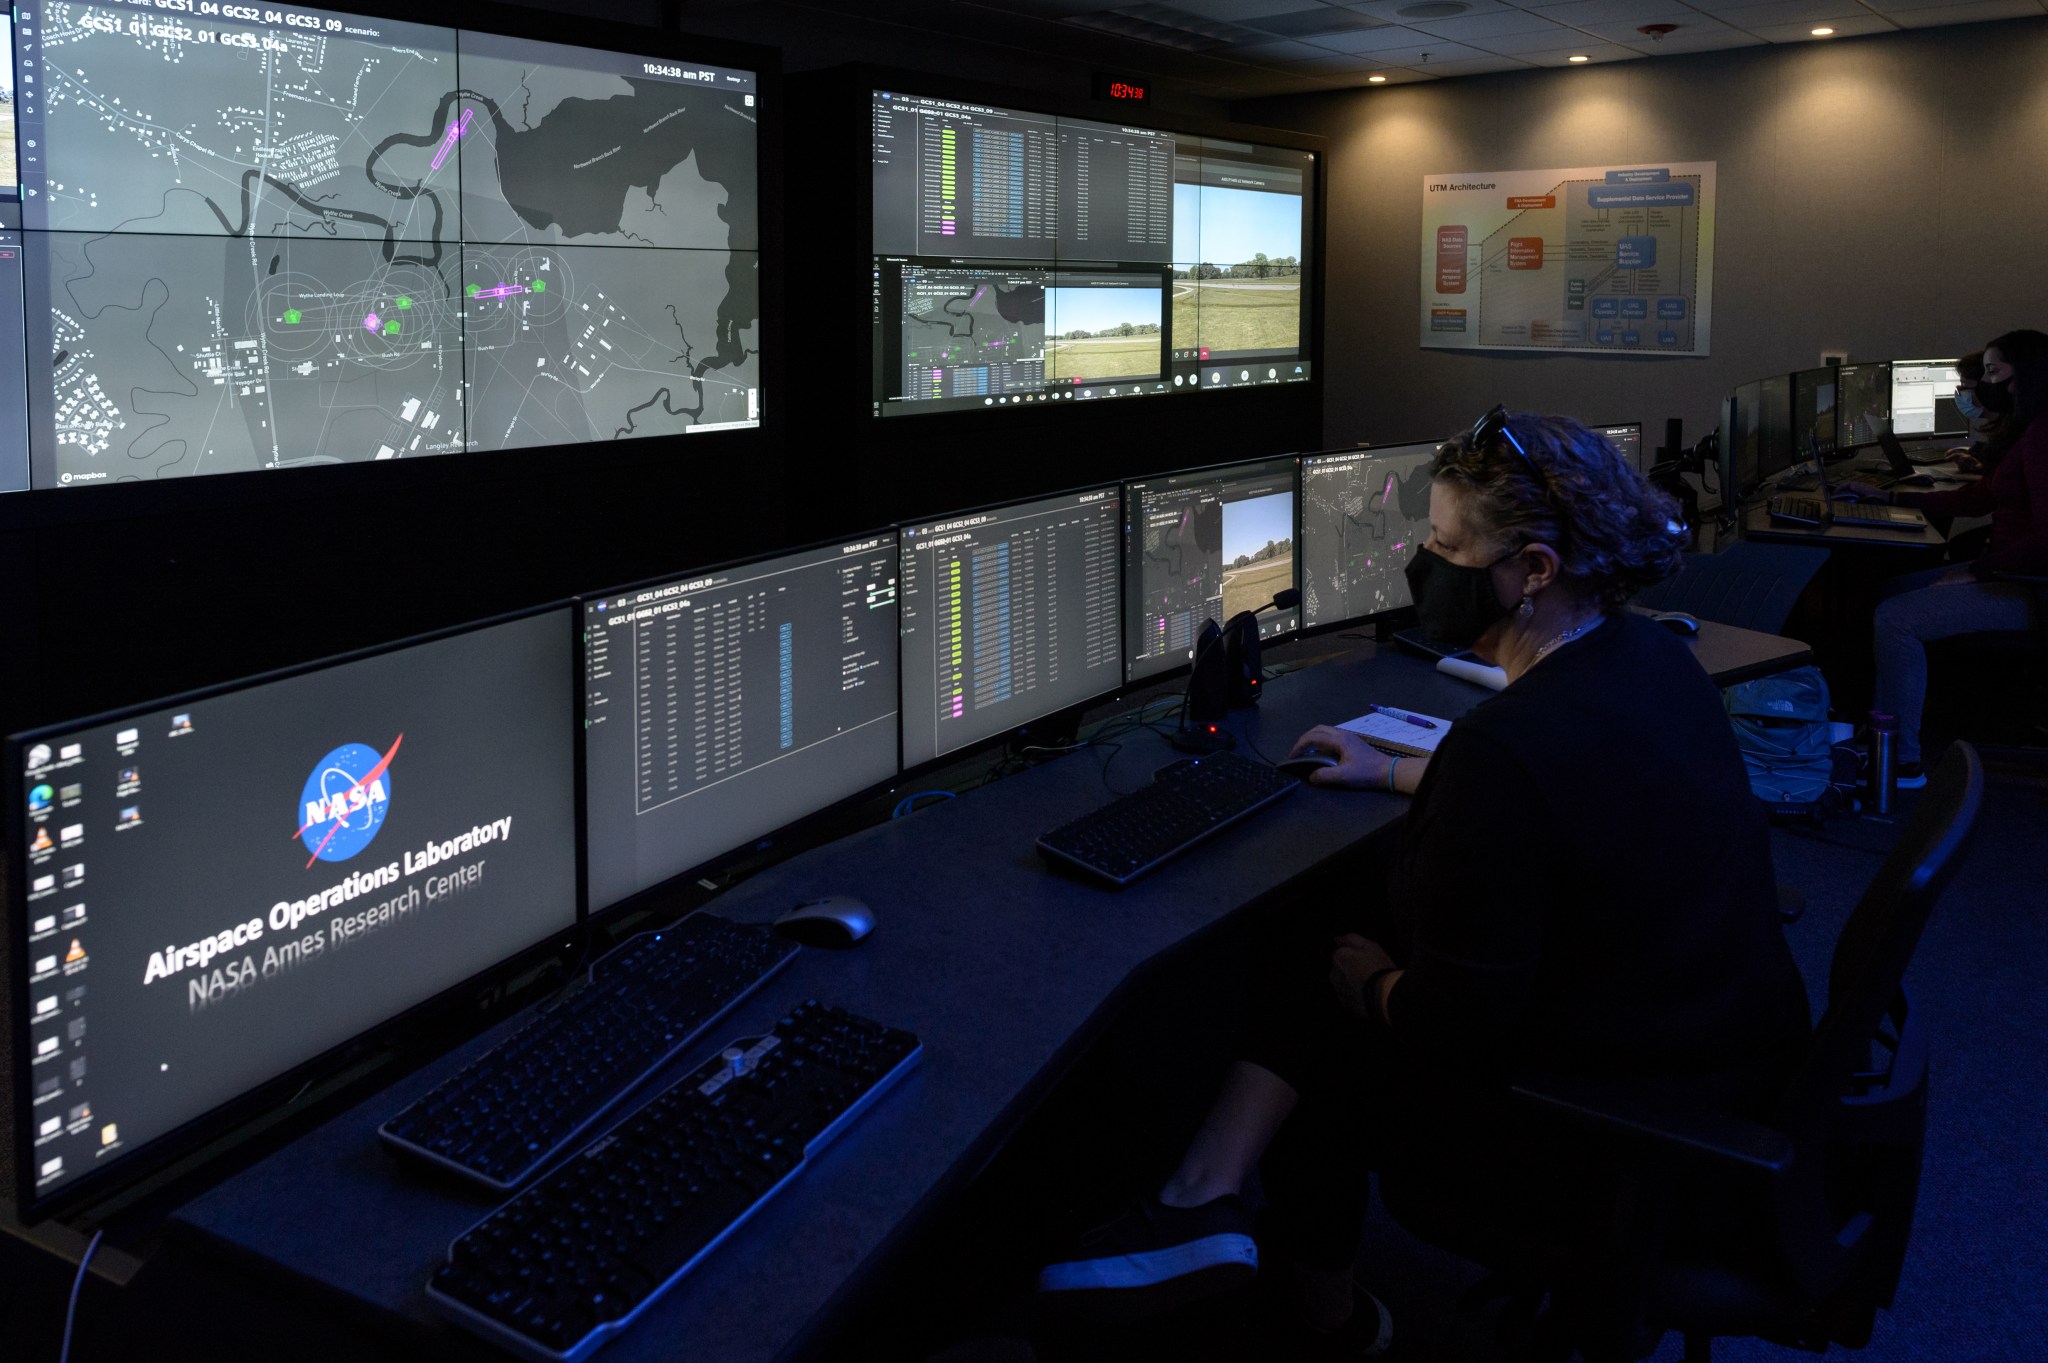 Ames HDV Airspace Operations Laboratory